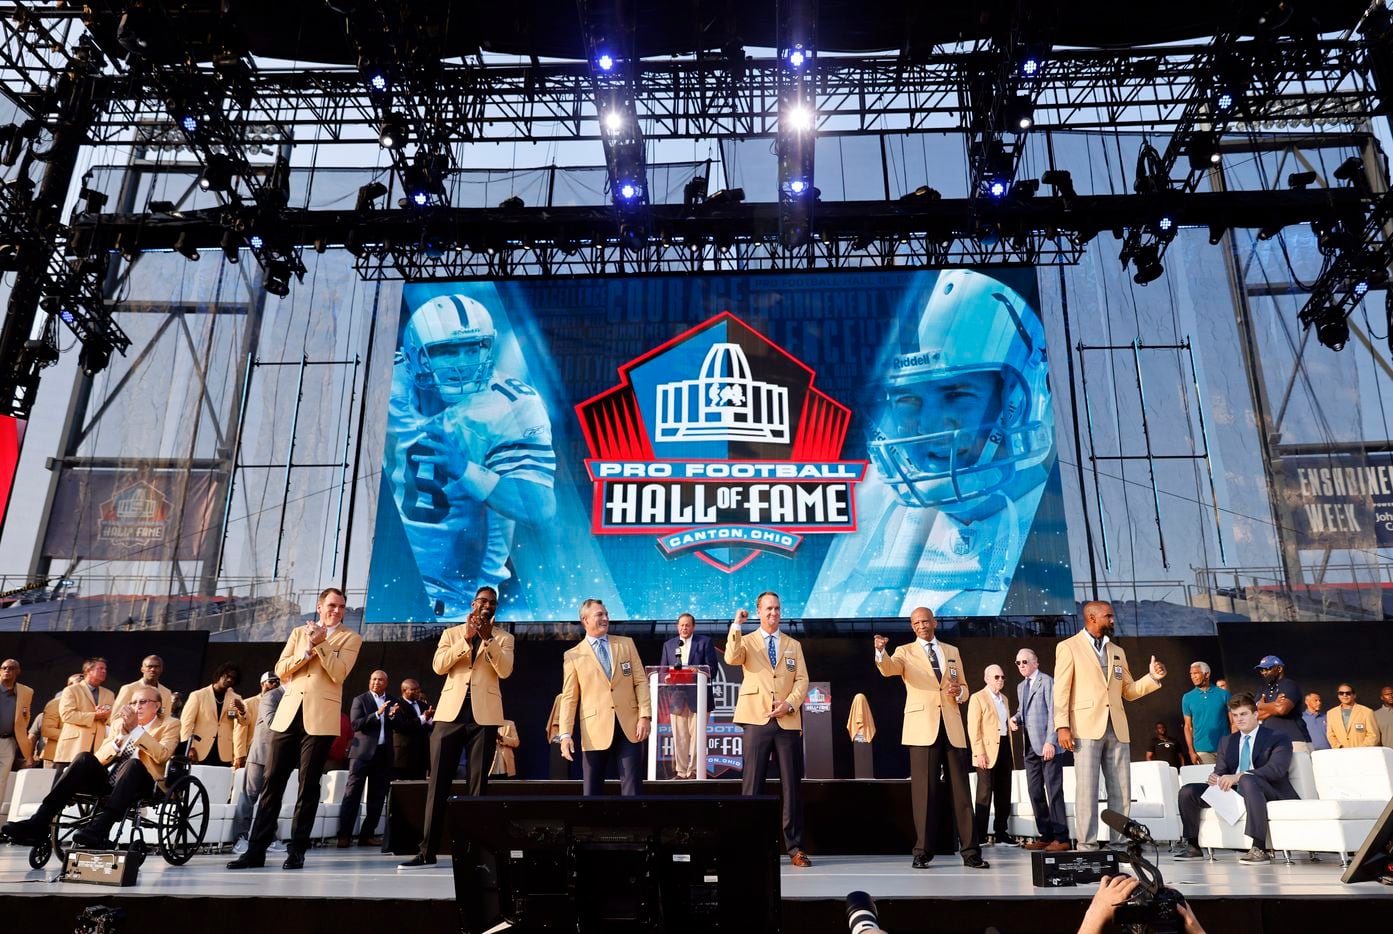 Pro Football Hall of Fame inductees, including Drew Pearson of the Dallas Cowboys (second from right) pose onstage after being introduced  during the Class of 2021 enshrinement ceremony at Tom Benson Hall of Fame Stadium in Canton, Ohio, Sunday, August 8, 2021. (Tom Fox/The Dallas Morning News)